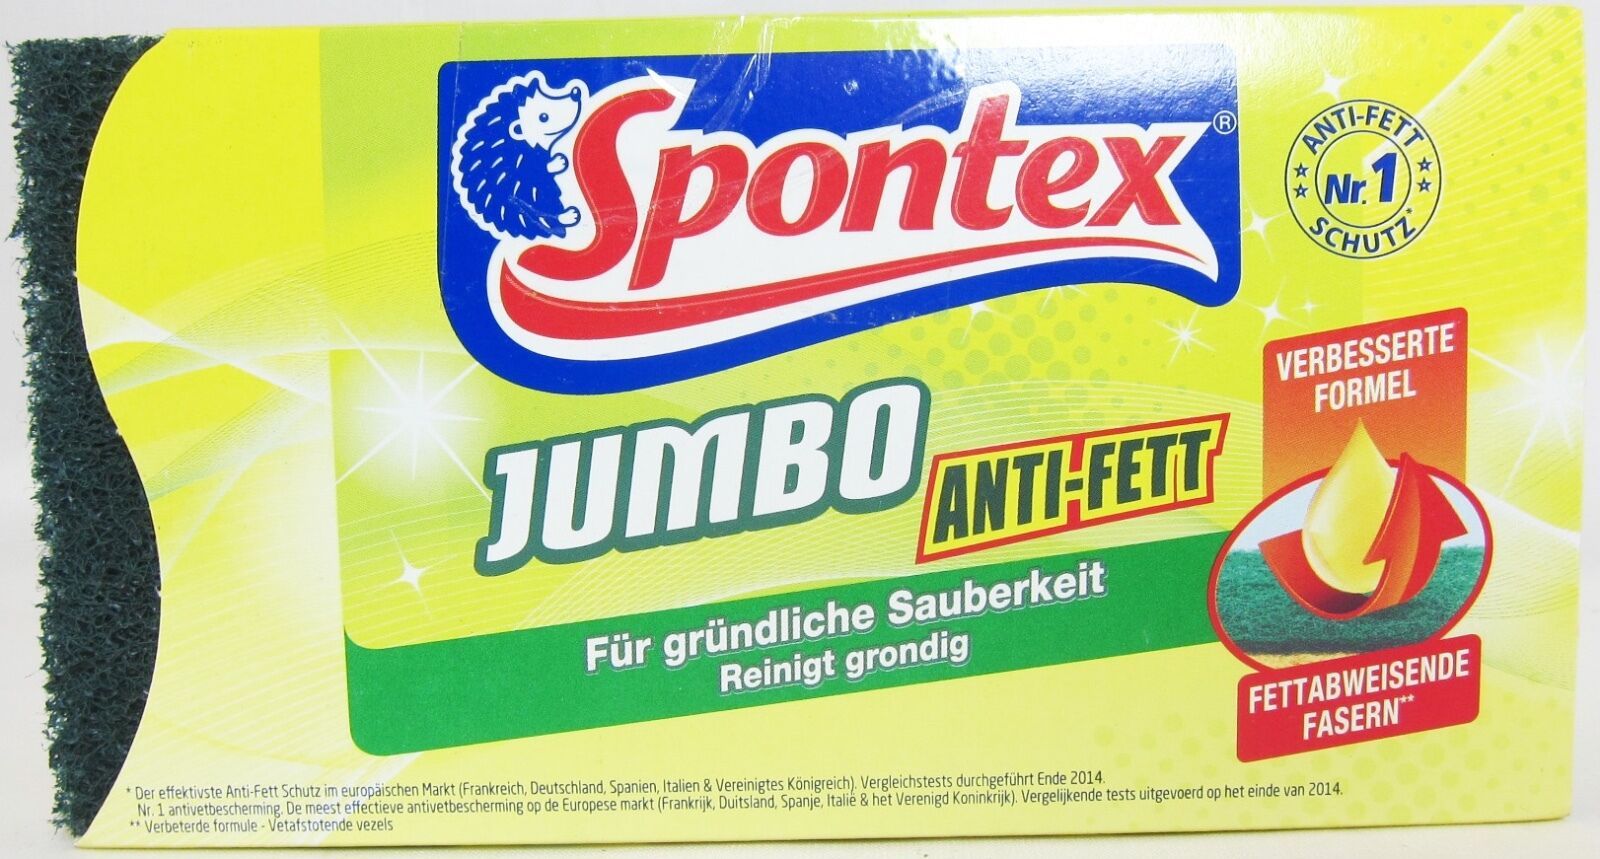 Spontex Stainless Steel Polish sponge - 1 ct - Made in Germany FREE  SHIPPING